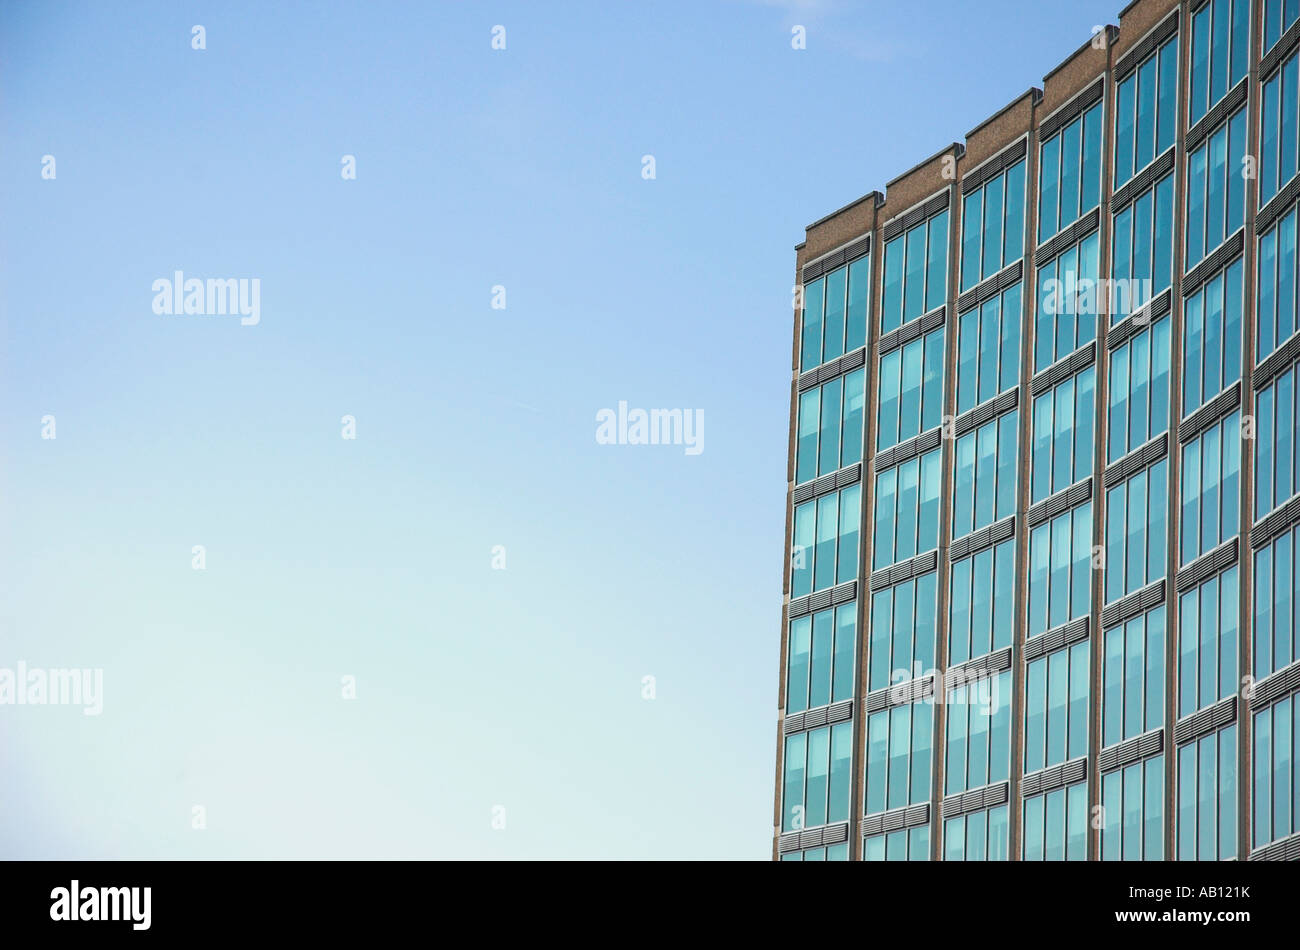 Office building exterior architecture Stock Photo